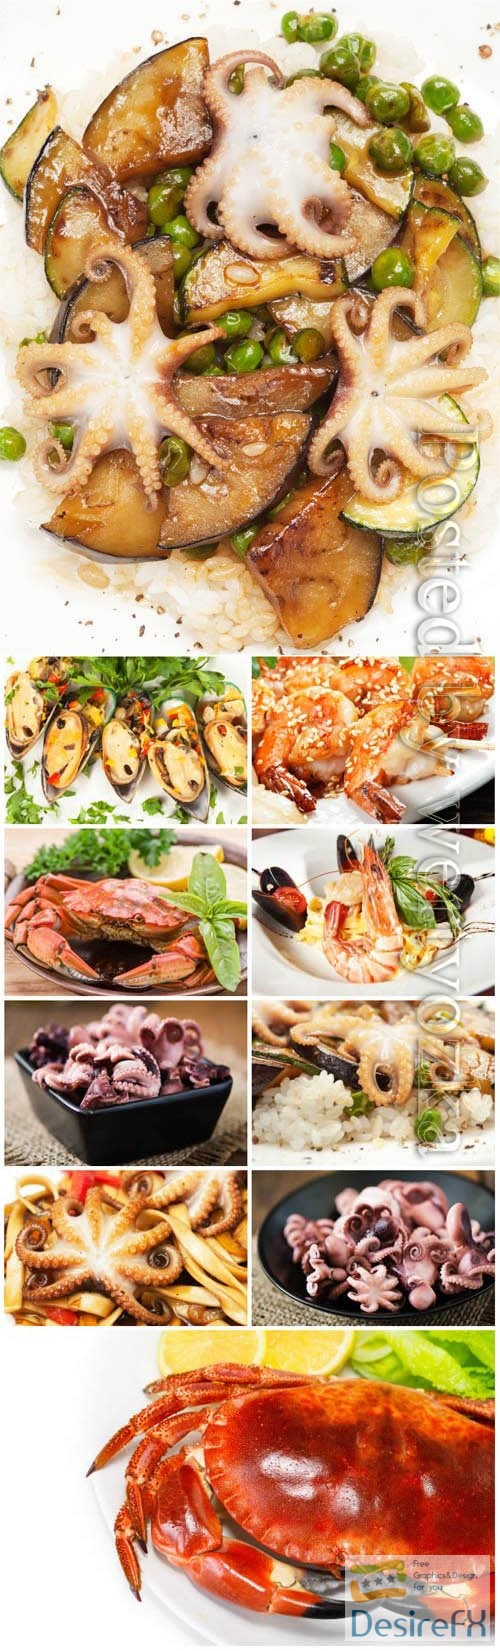 Seafood, delicious food stock photo